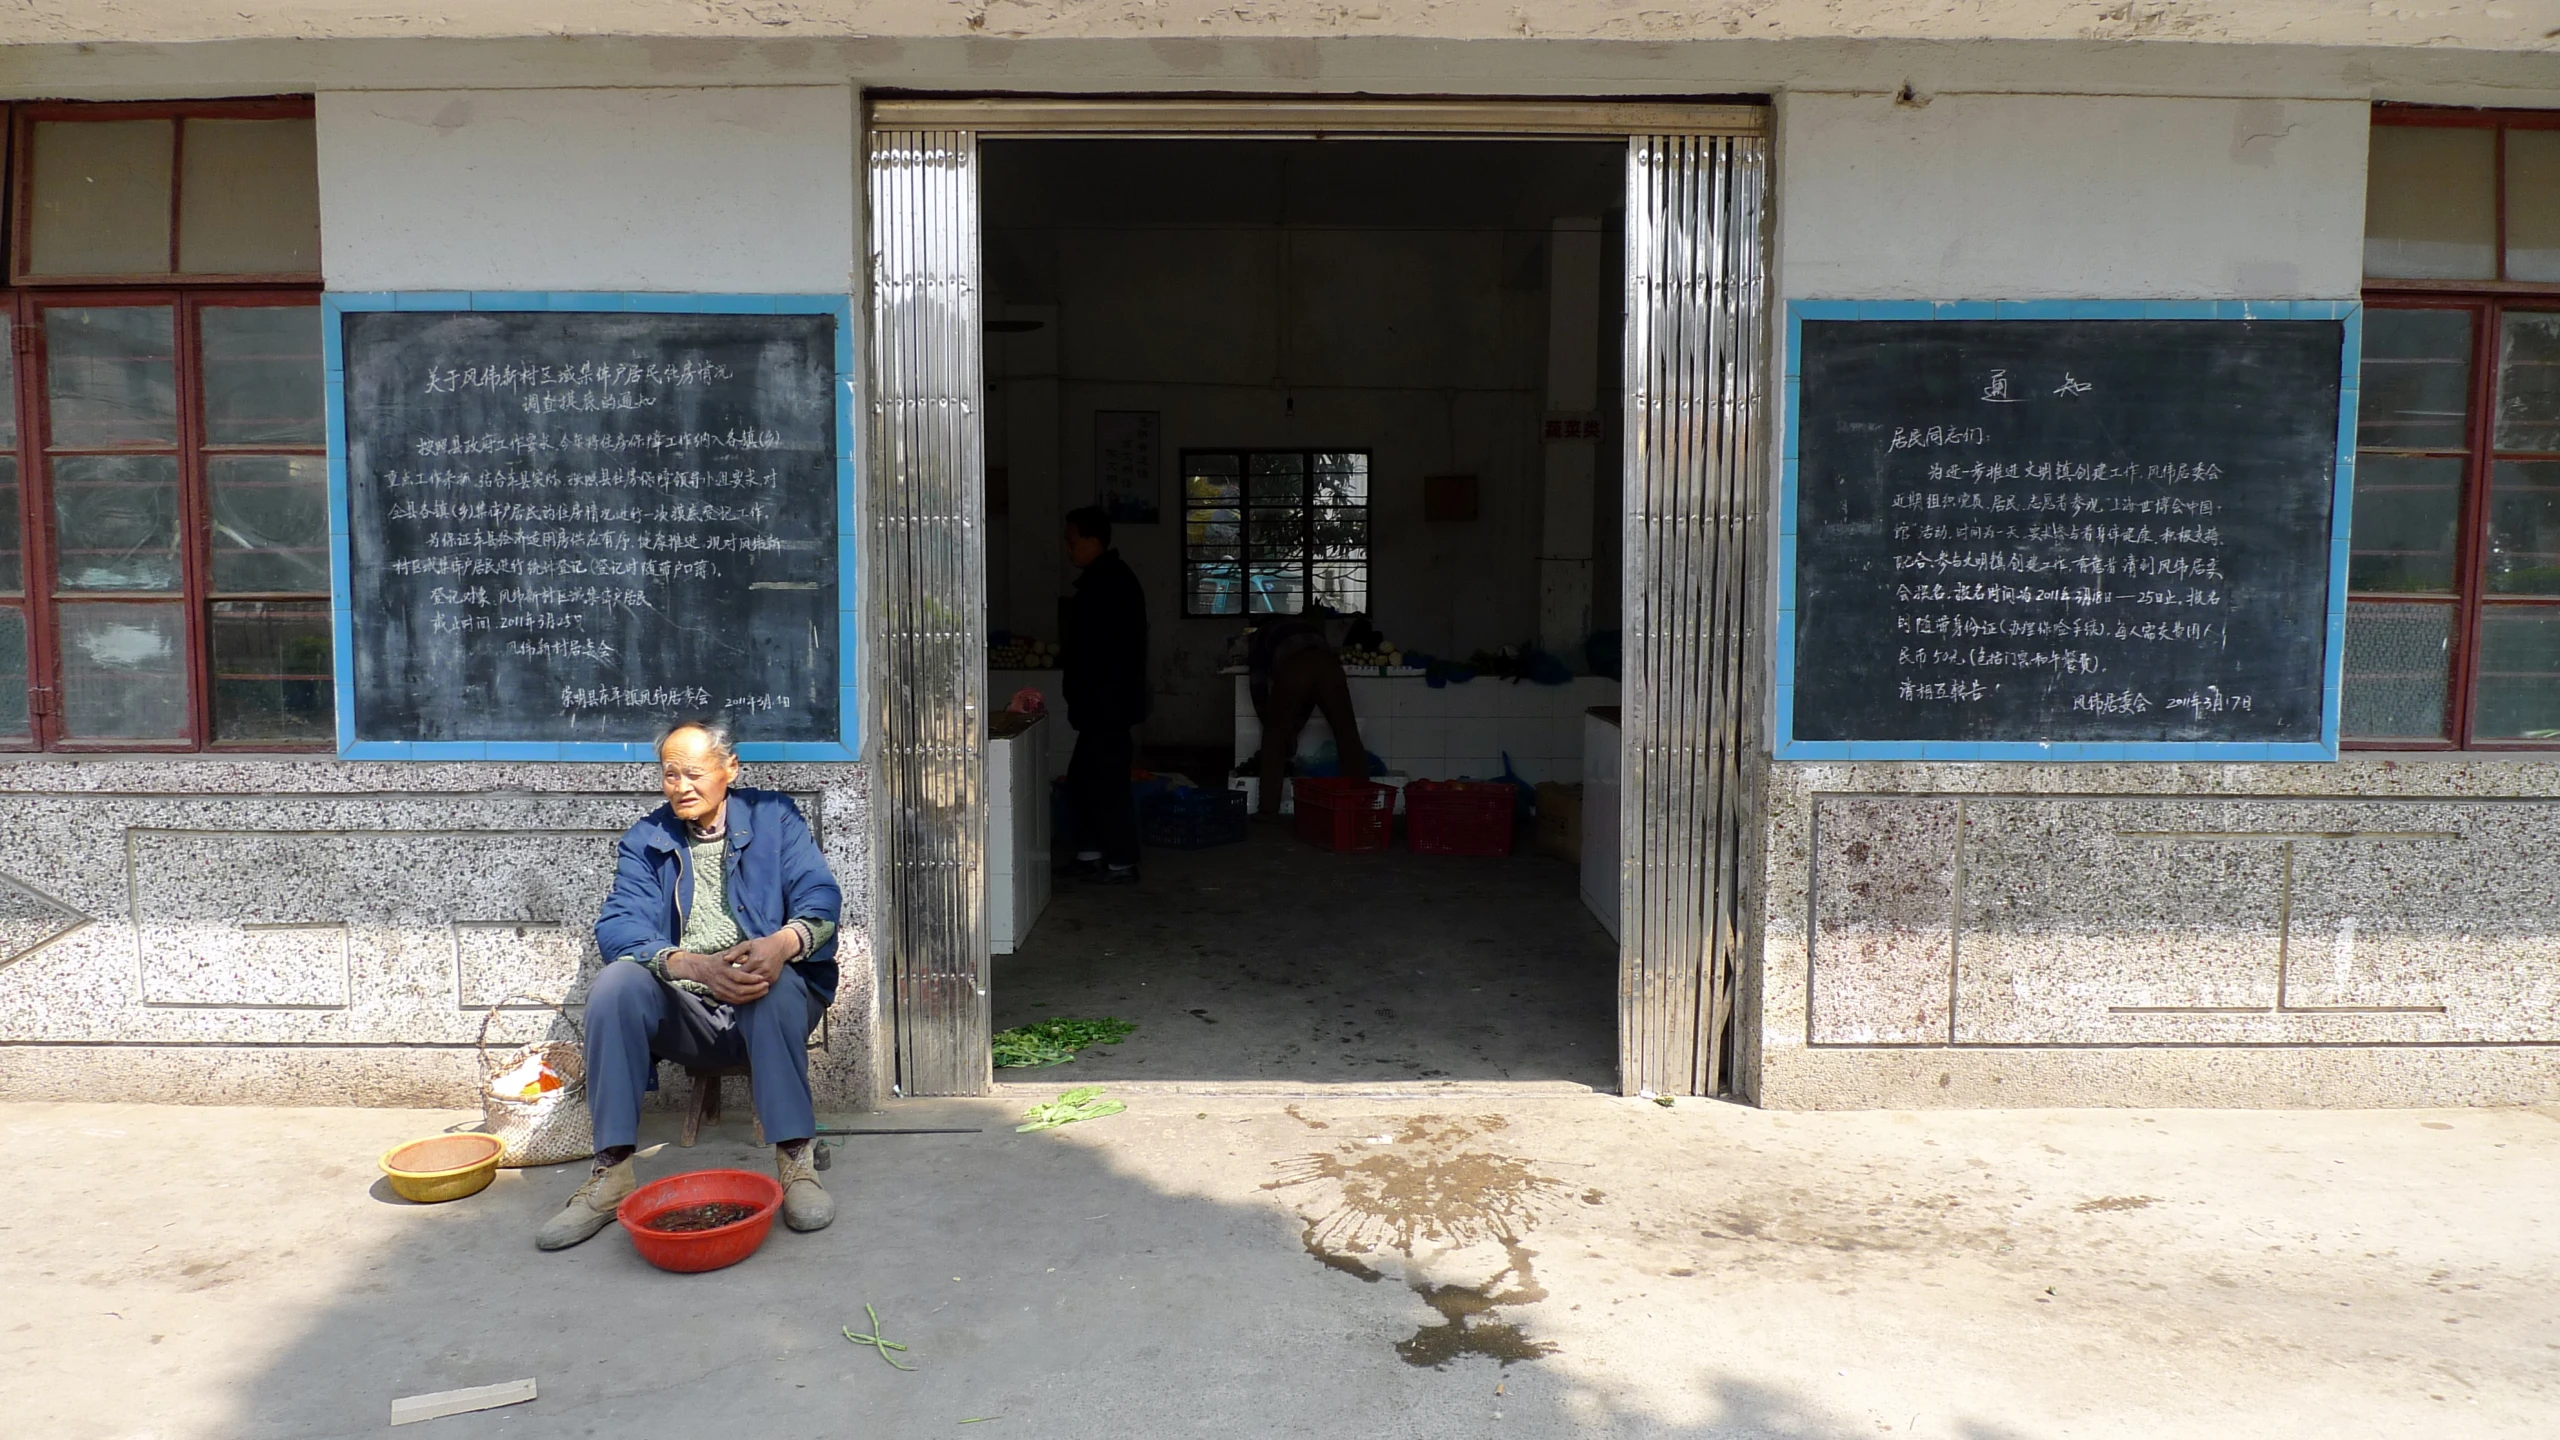 a man sits on the sidewalk in front of a chalkboard building